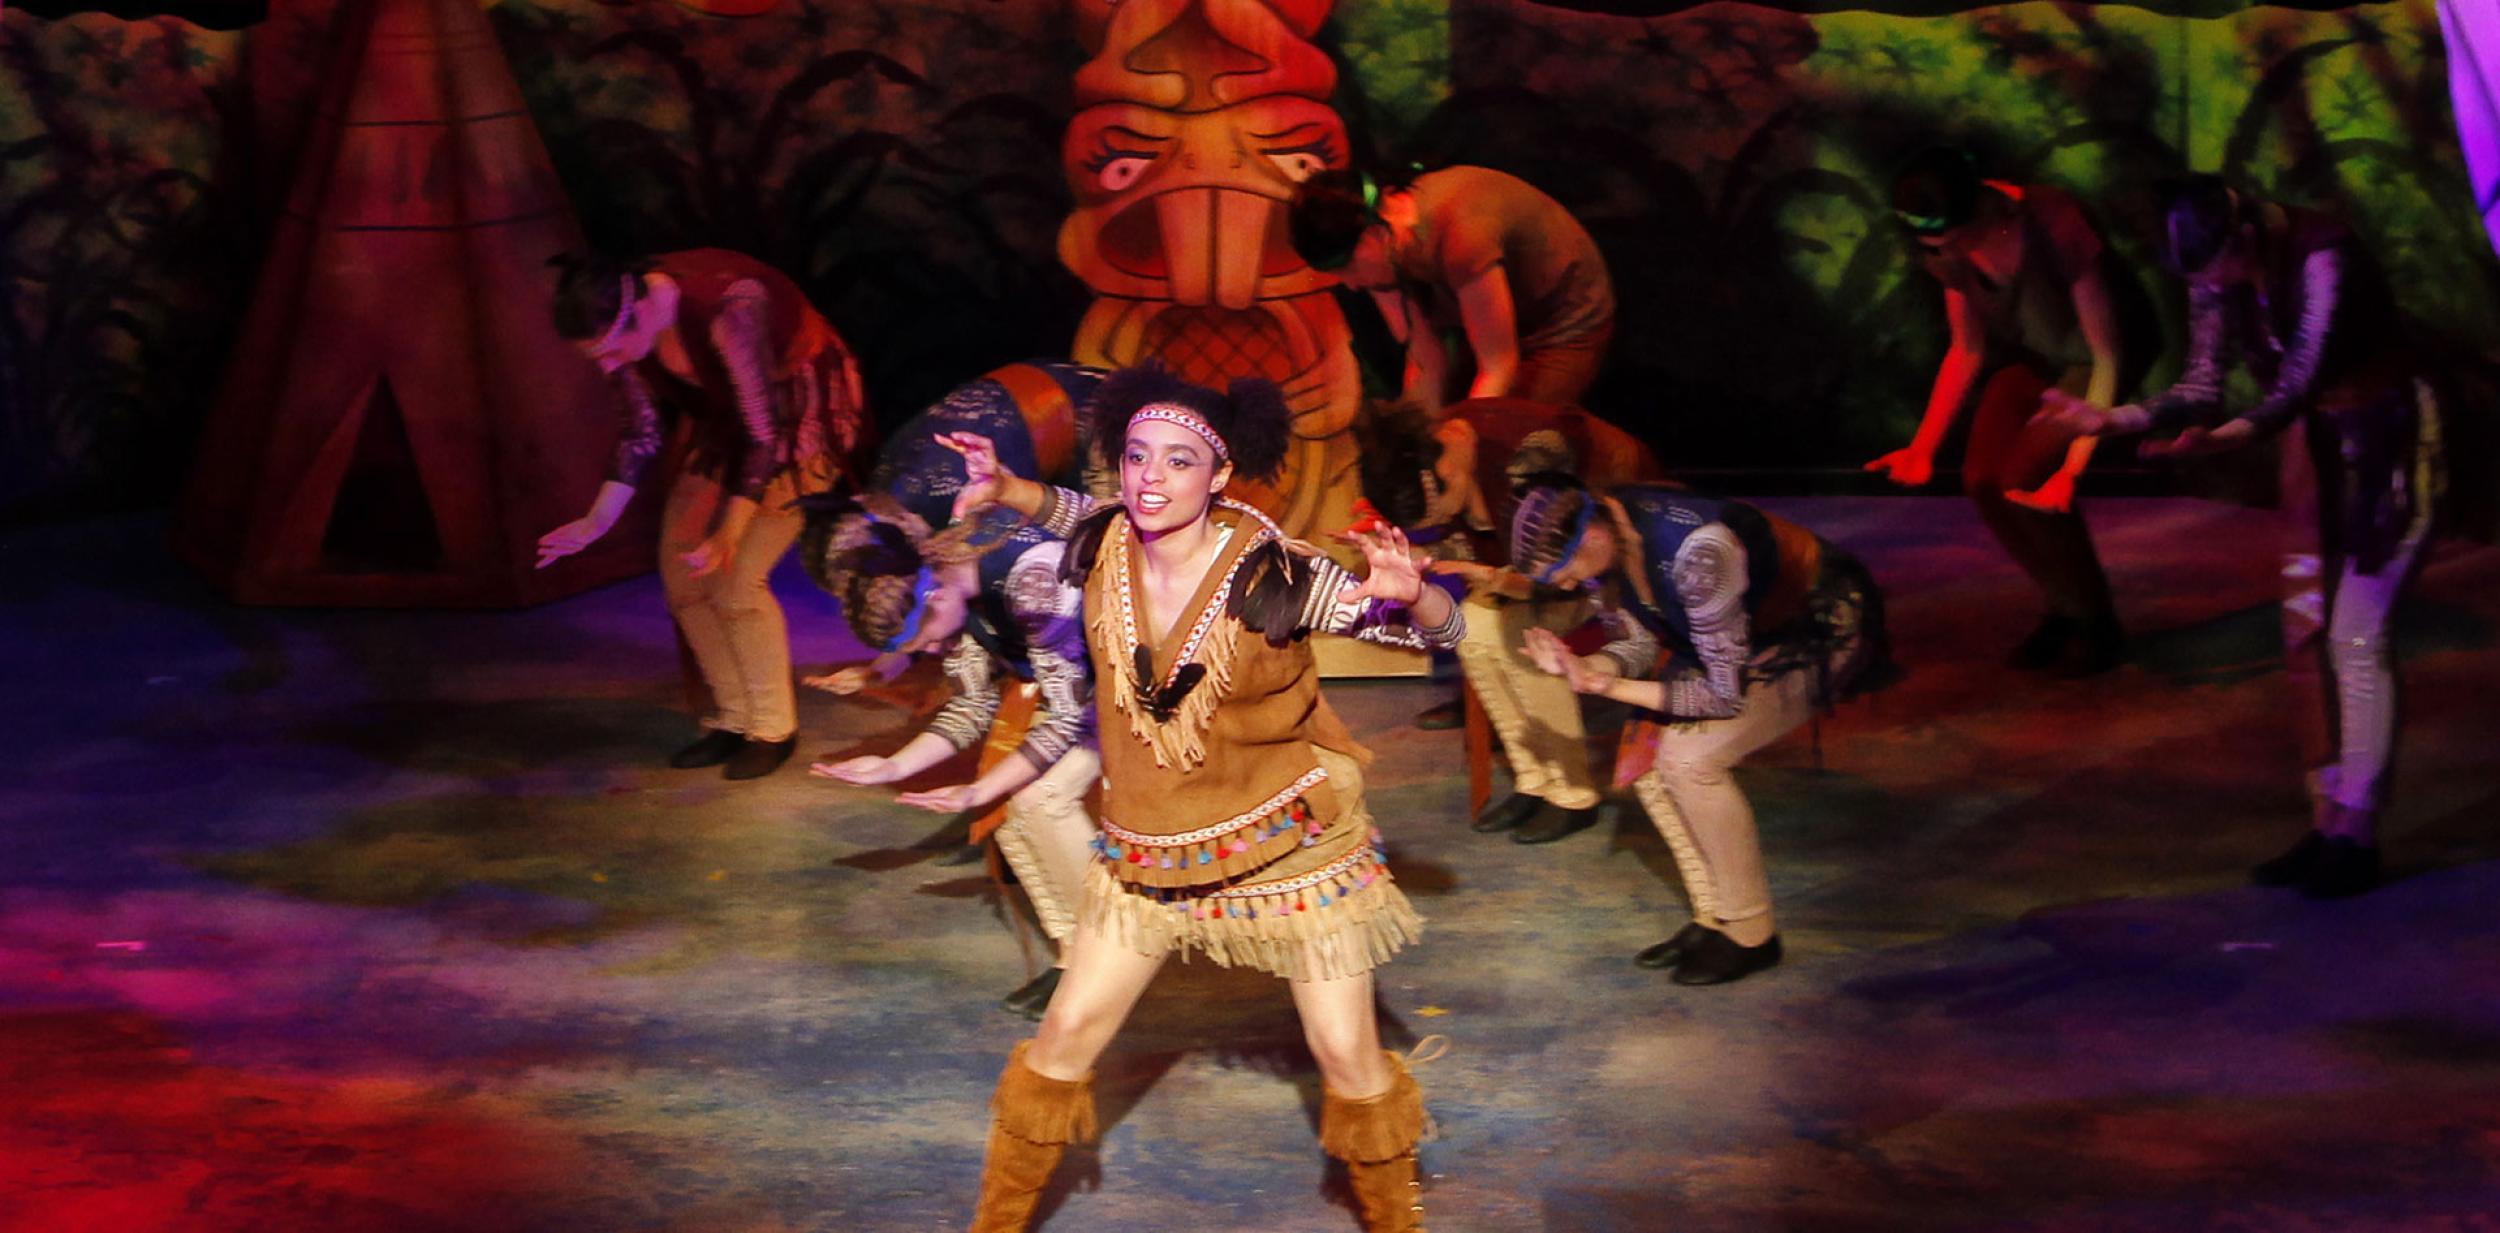 Panto character dancing on stage in native american costume